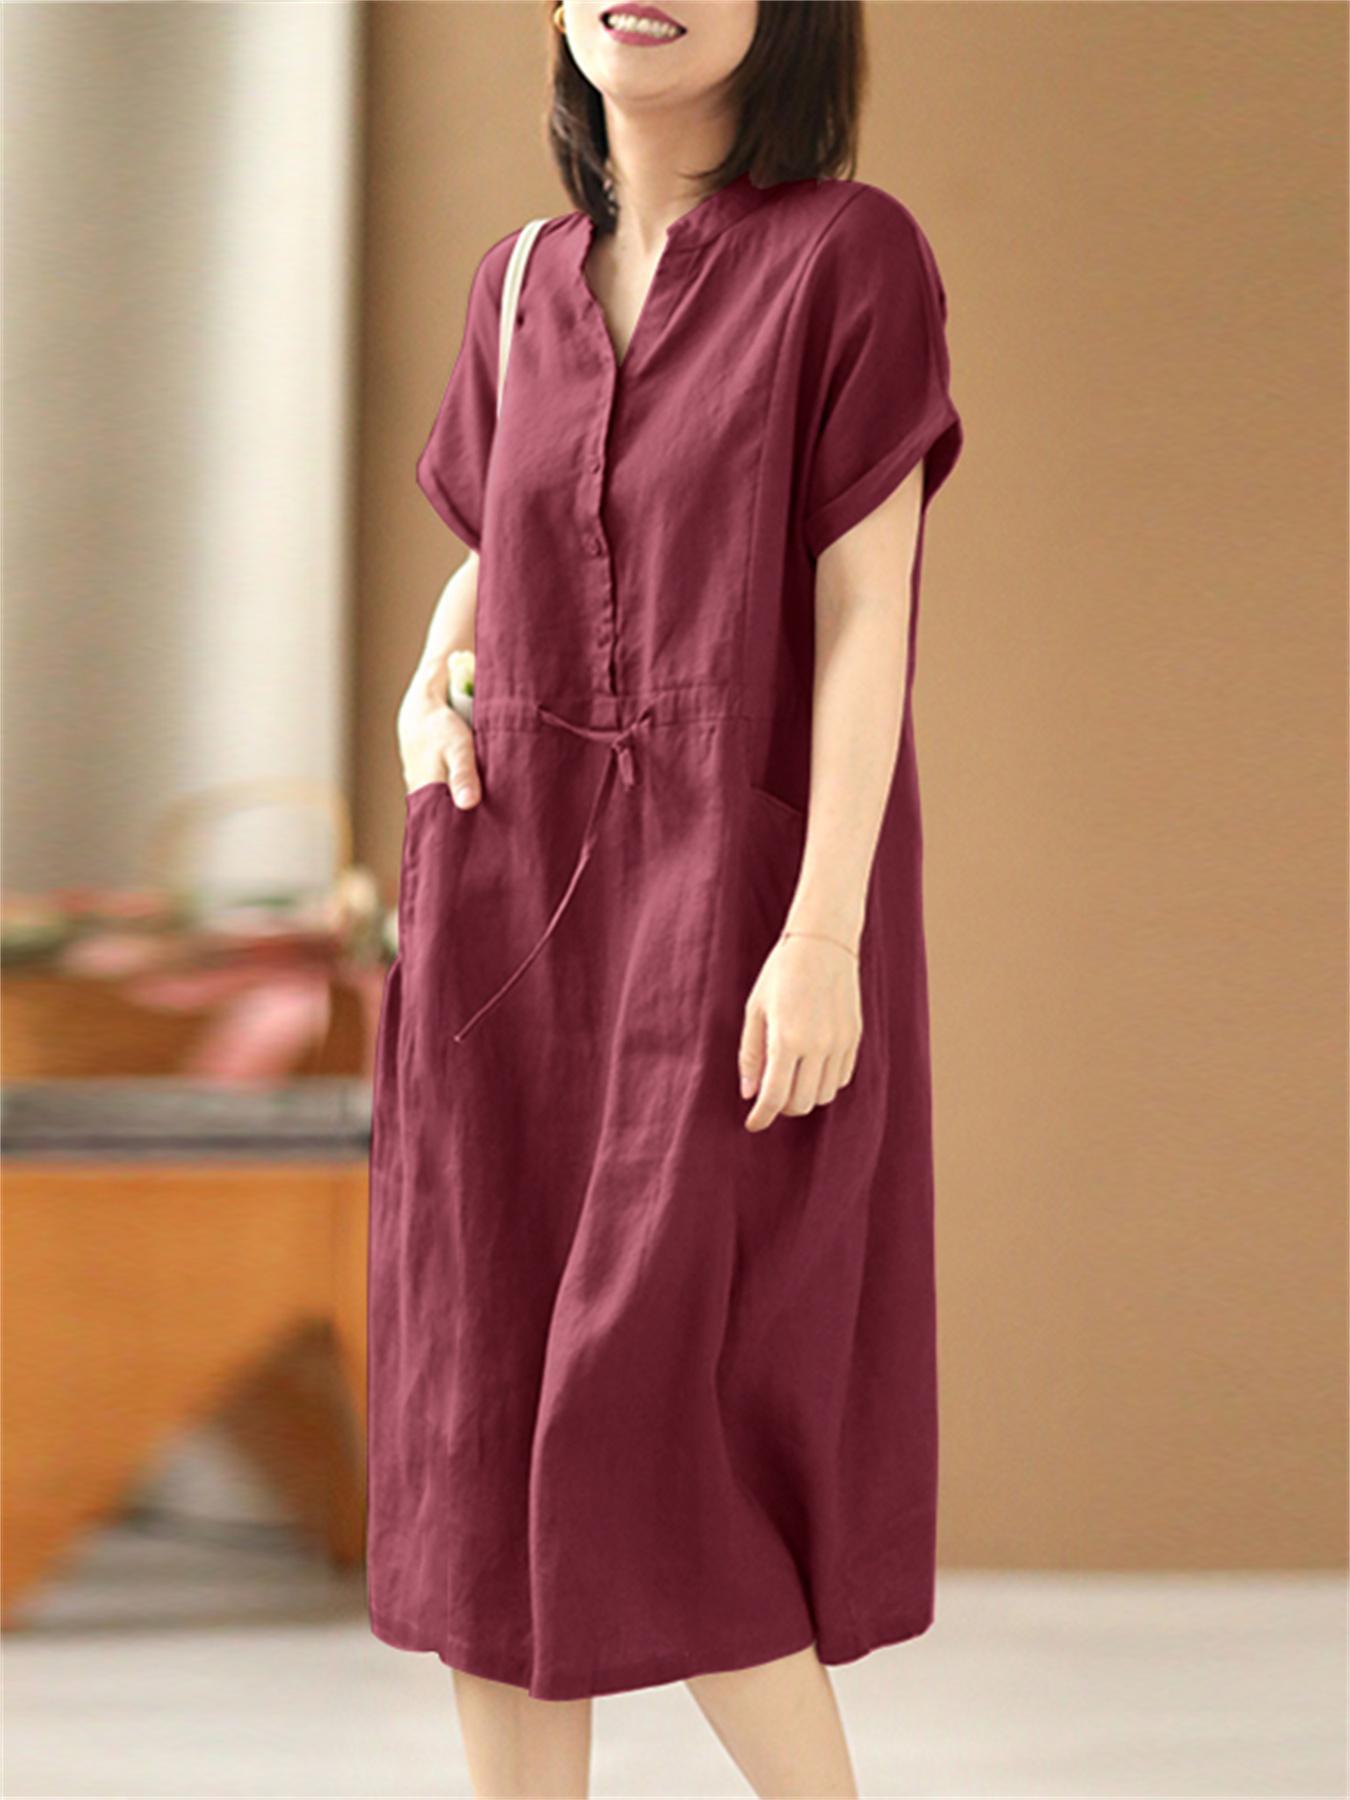 Solid Button Up With Pocket Loose Dress For Spring & Summer, Women's Clothing